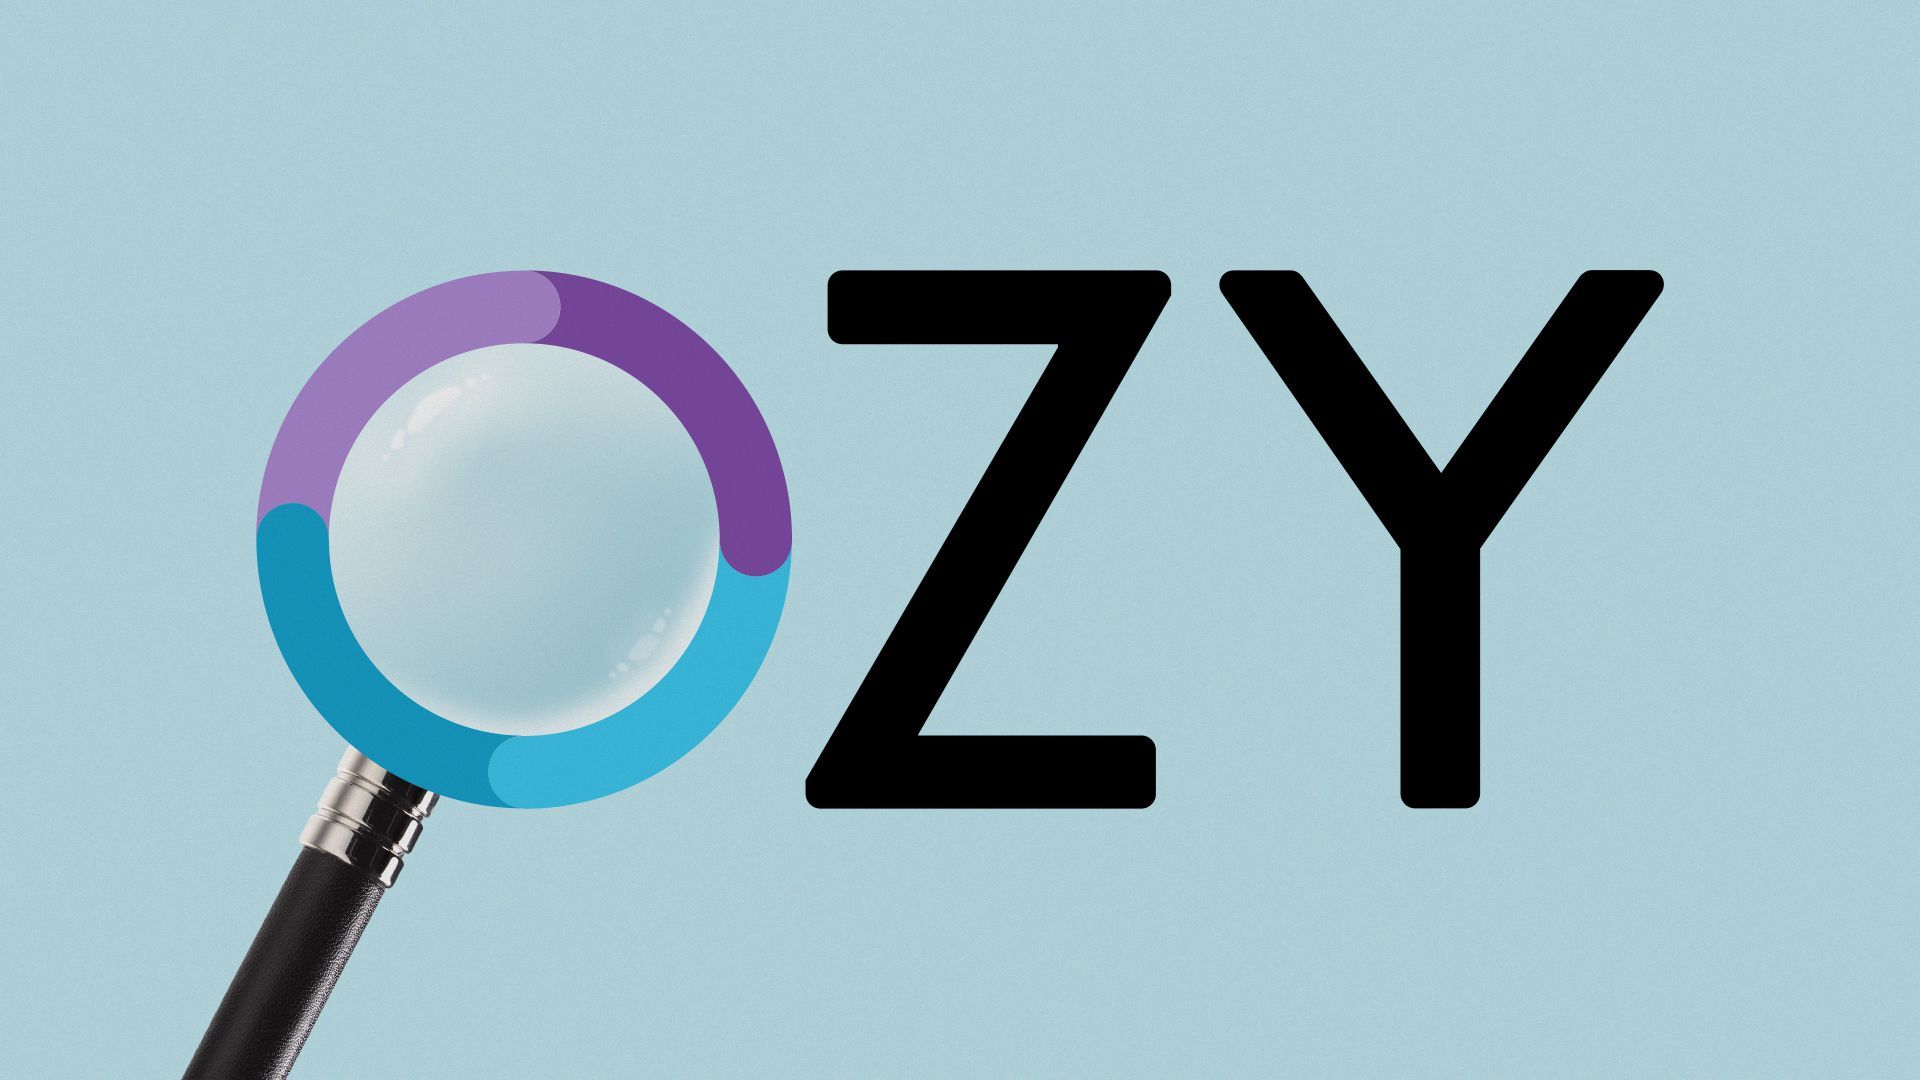 Illustration of the Ozy logo, which is the letters O-Z-Y in all caps, with the "O" in the shape of a magnifying glass.